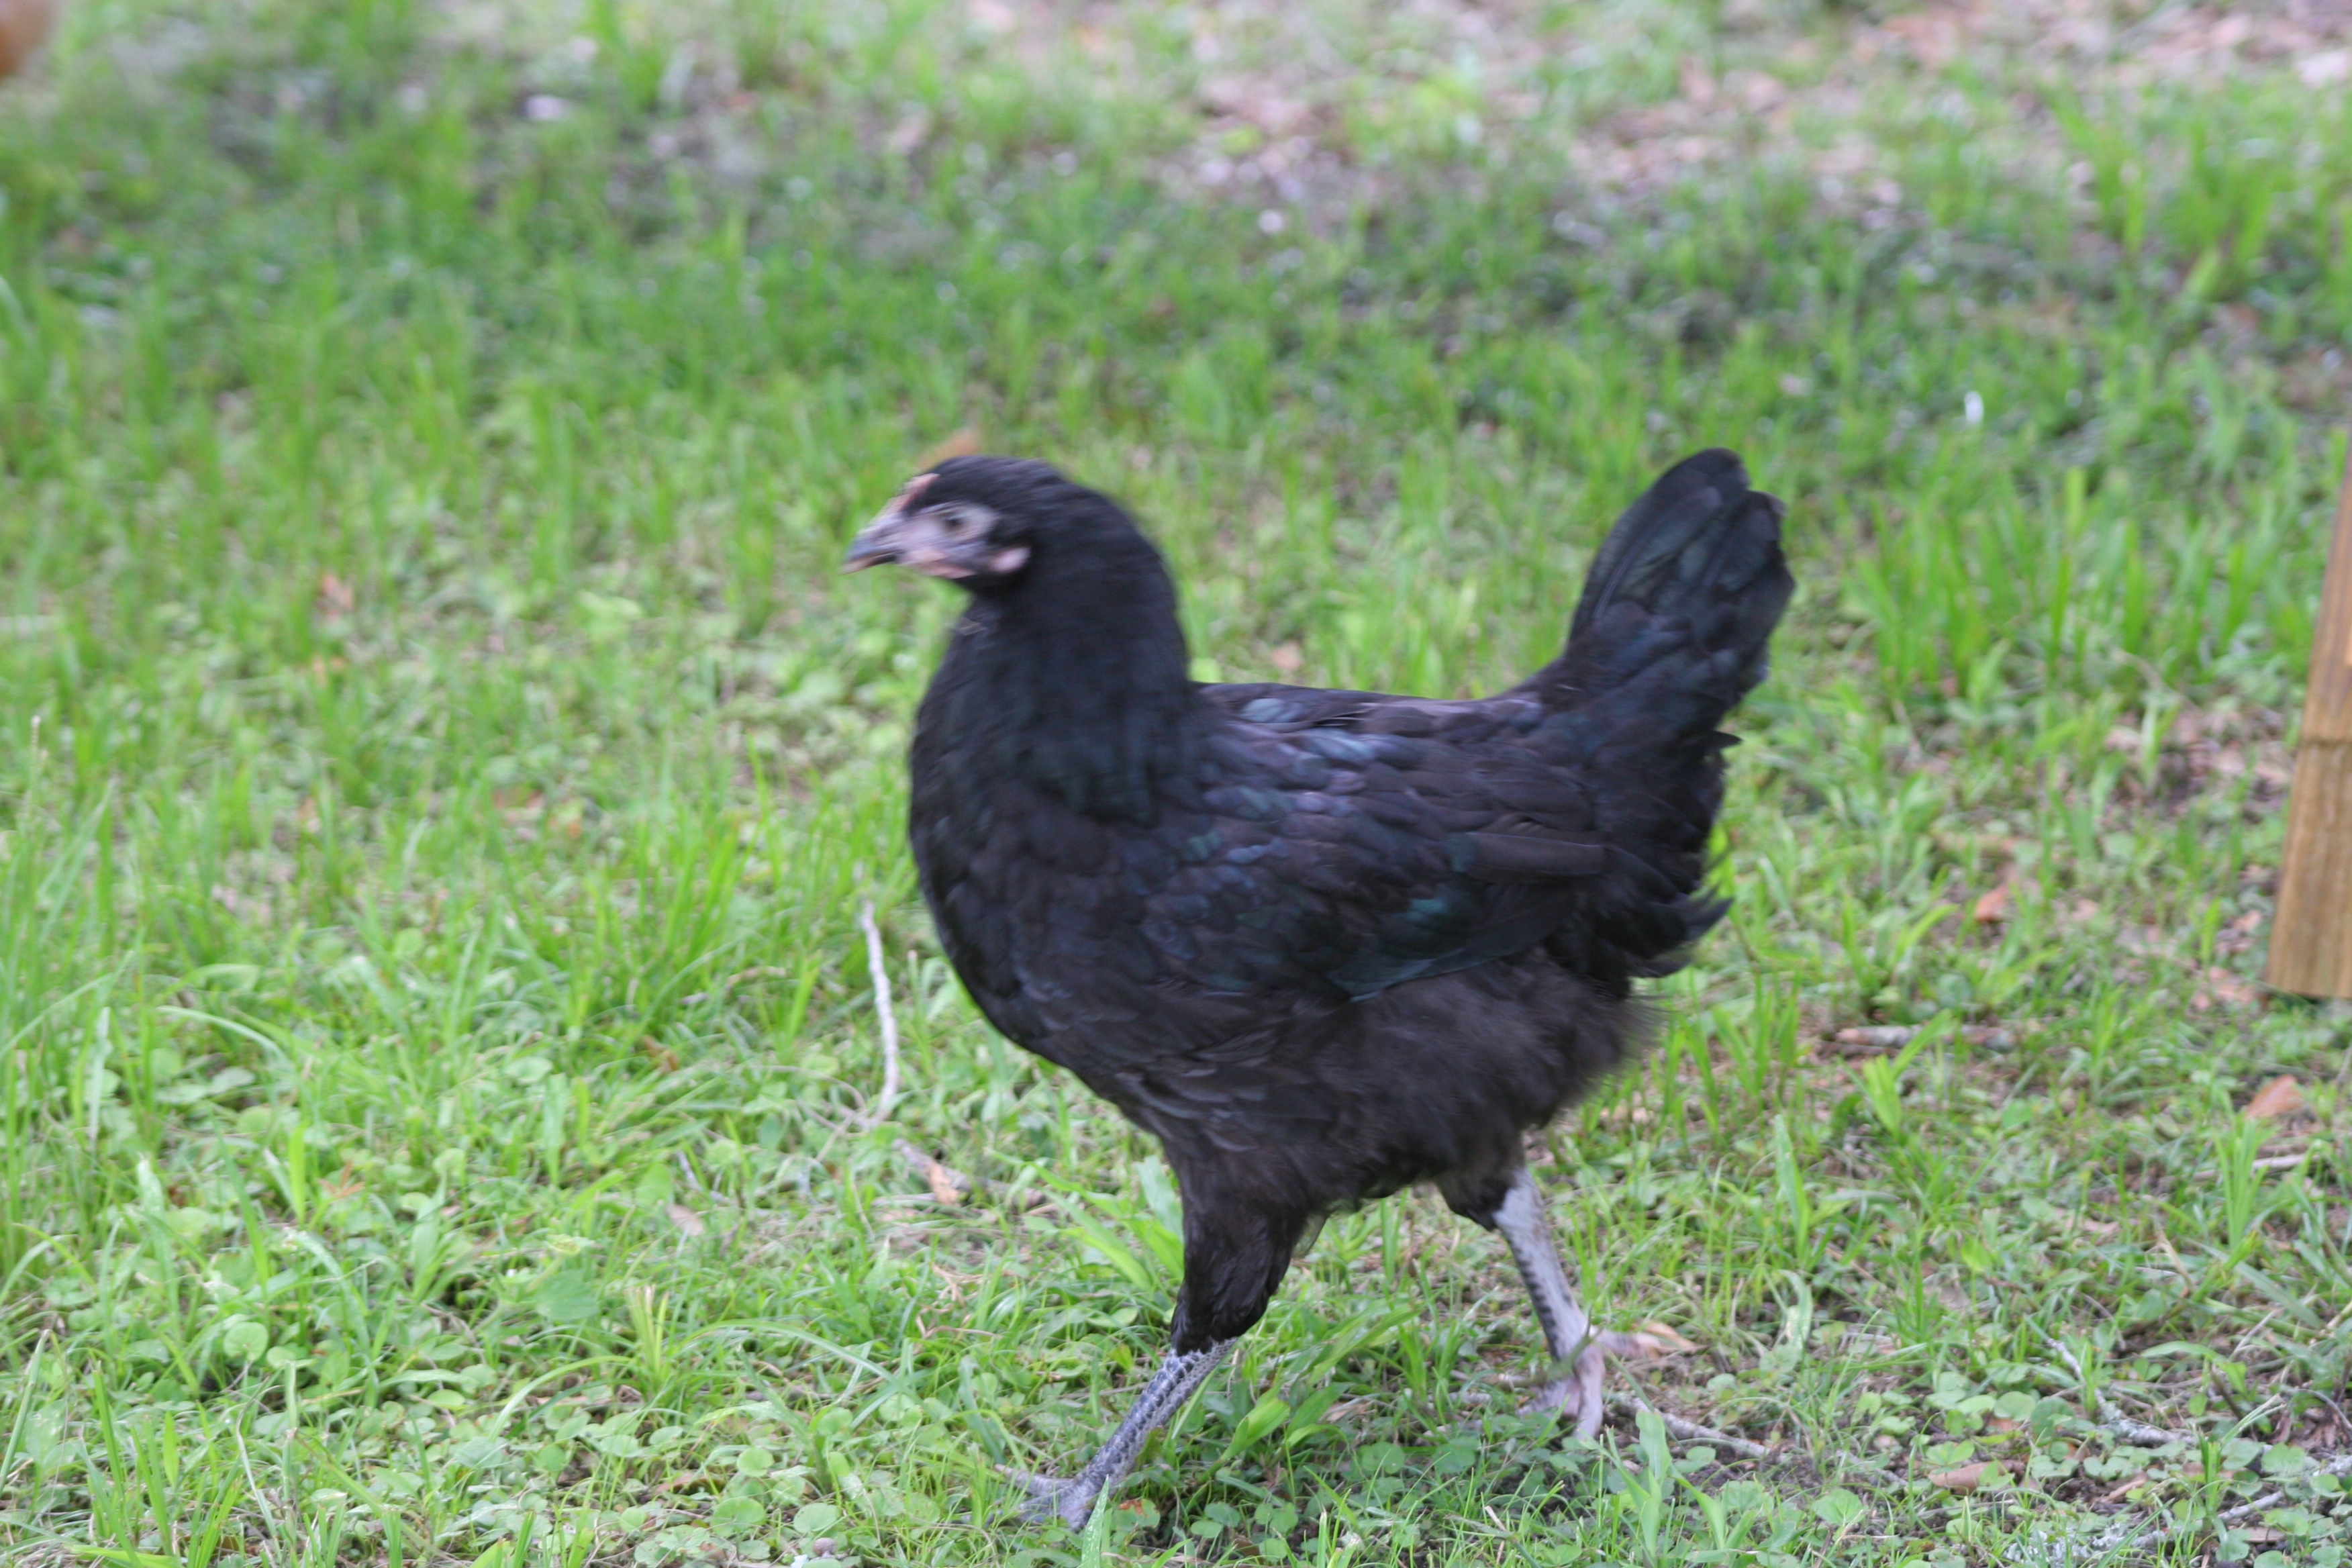 Dolly the Australorp